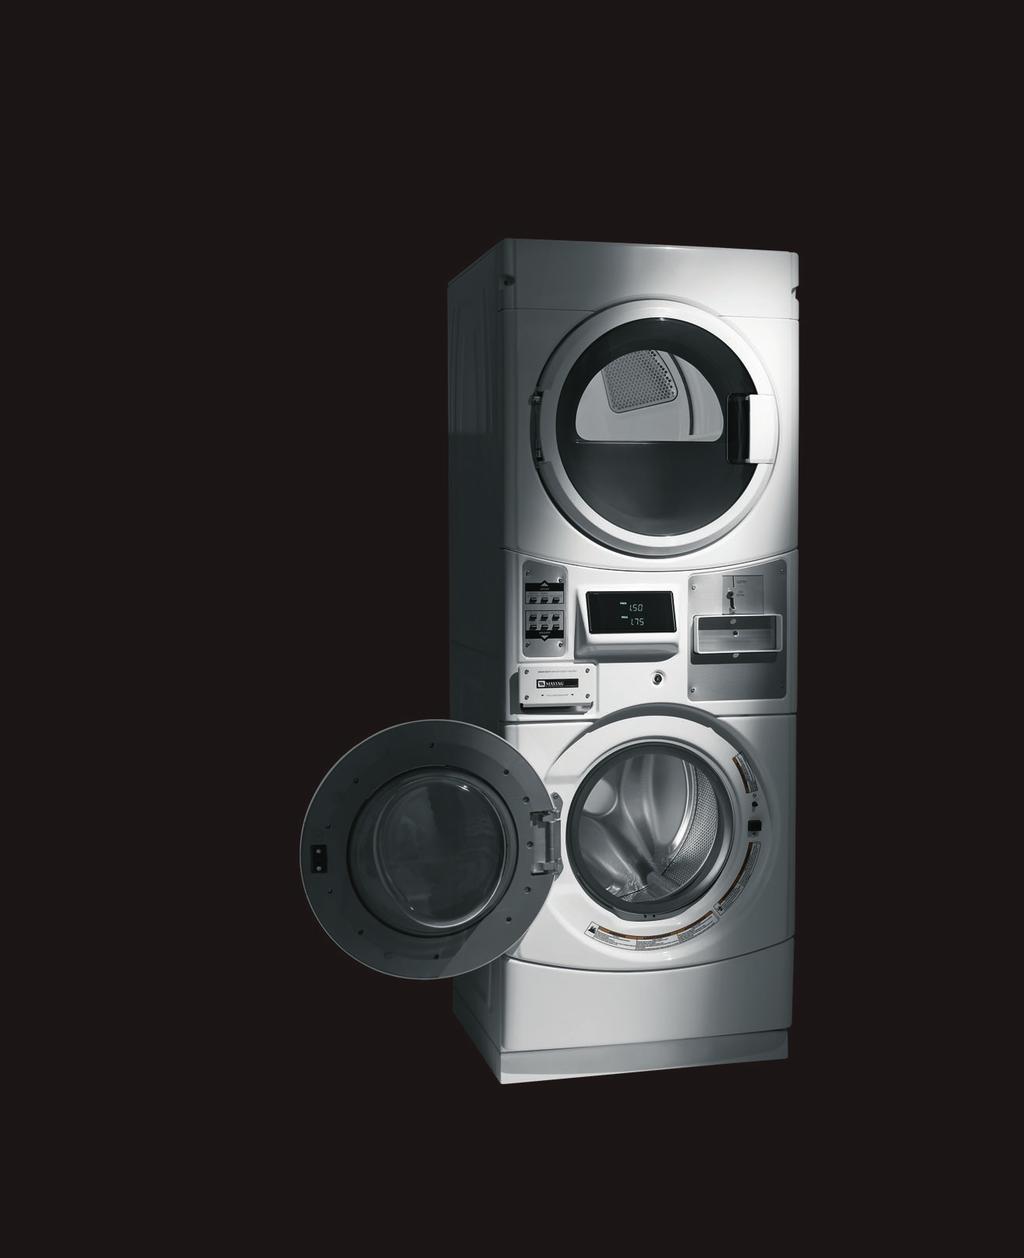 New Maytag Stack Washer/Dryer Introducing the ultimate laundry pair Tight on space? Go vertical!